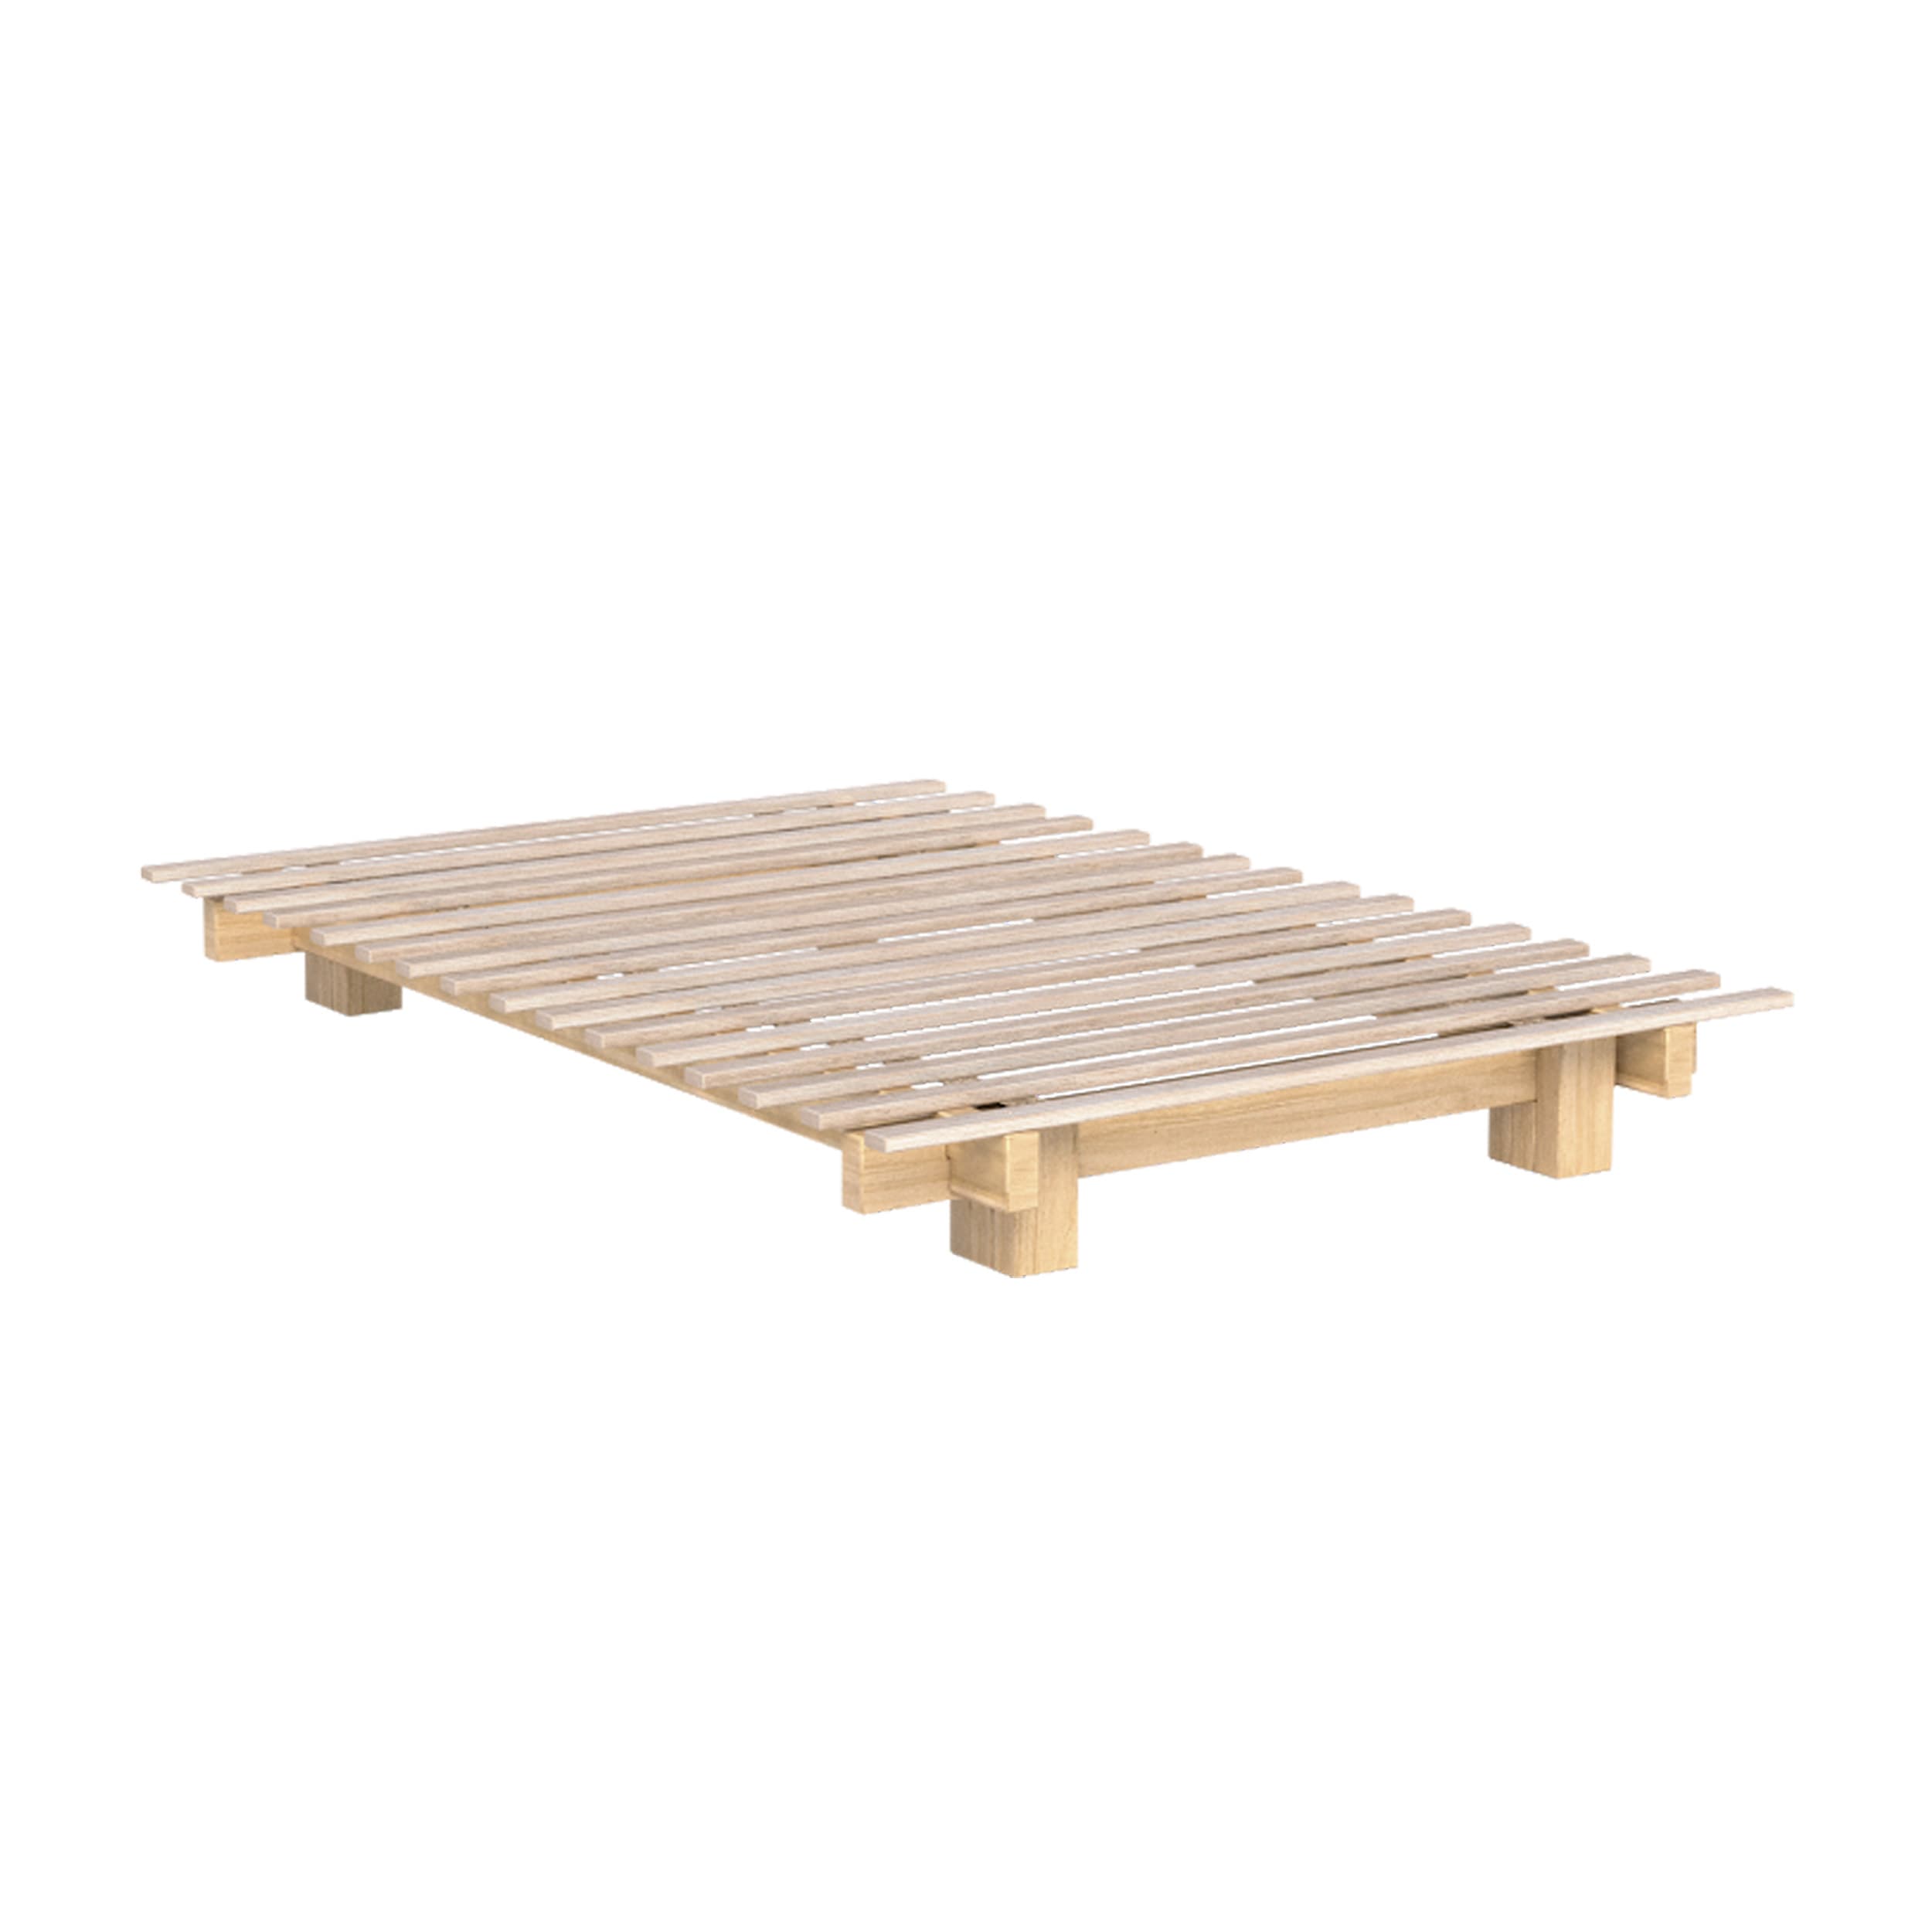 Lo-line Timber Bed Frame